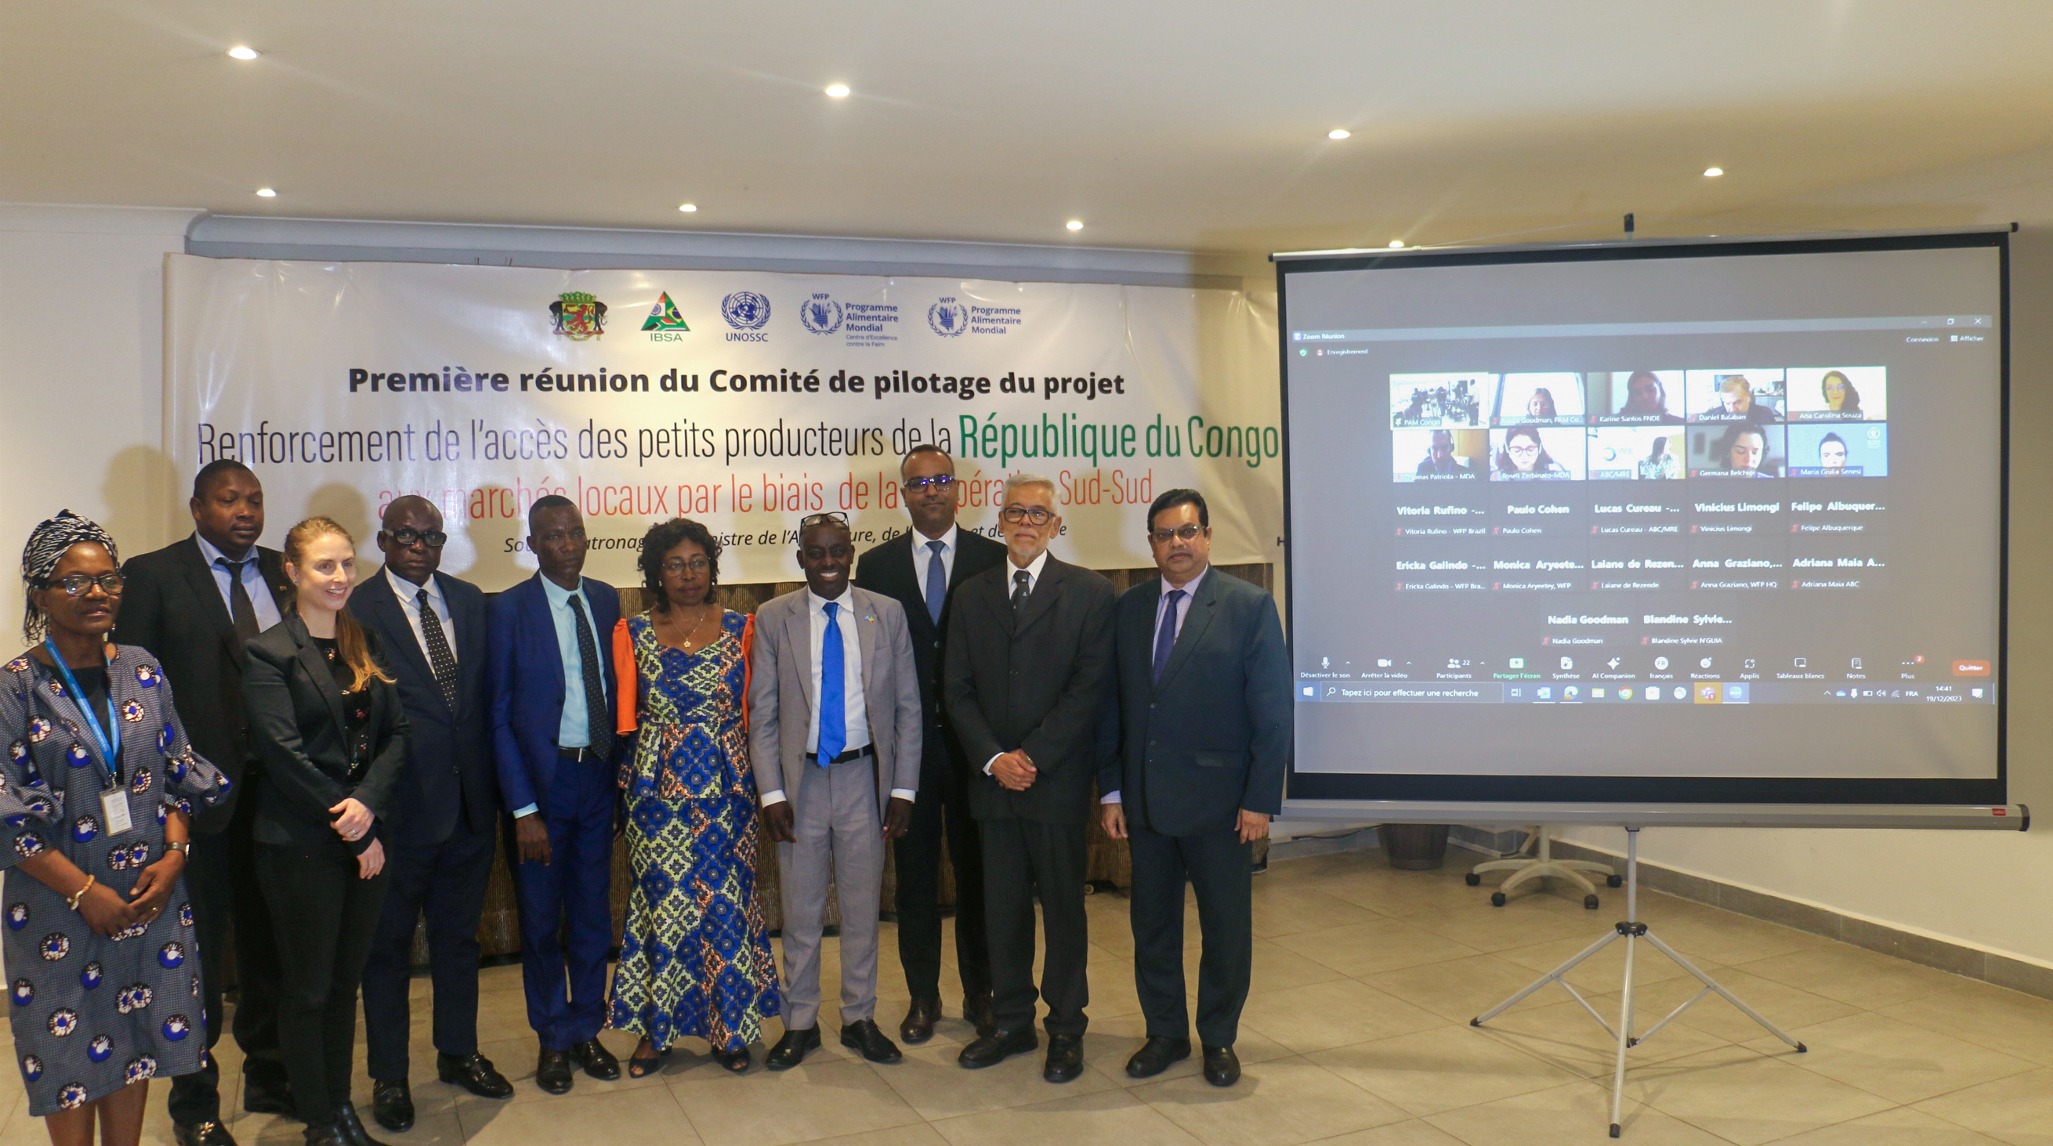 Launch of South-South Cooperation Initiative on School Feeding and Smallholder Farming between Brazil and the Republic of Congo